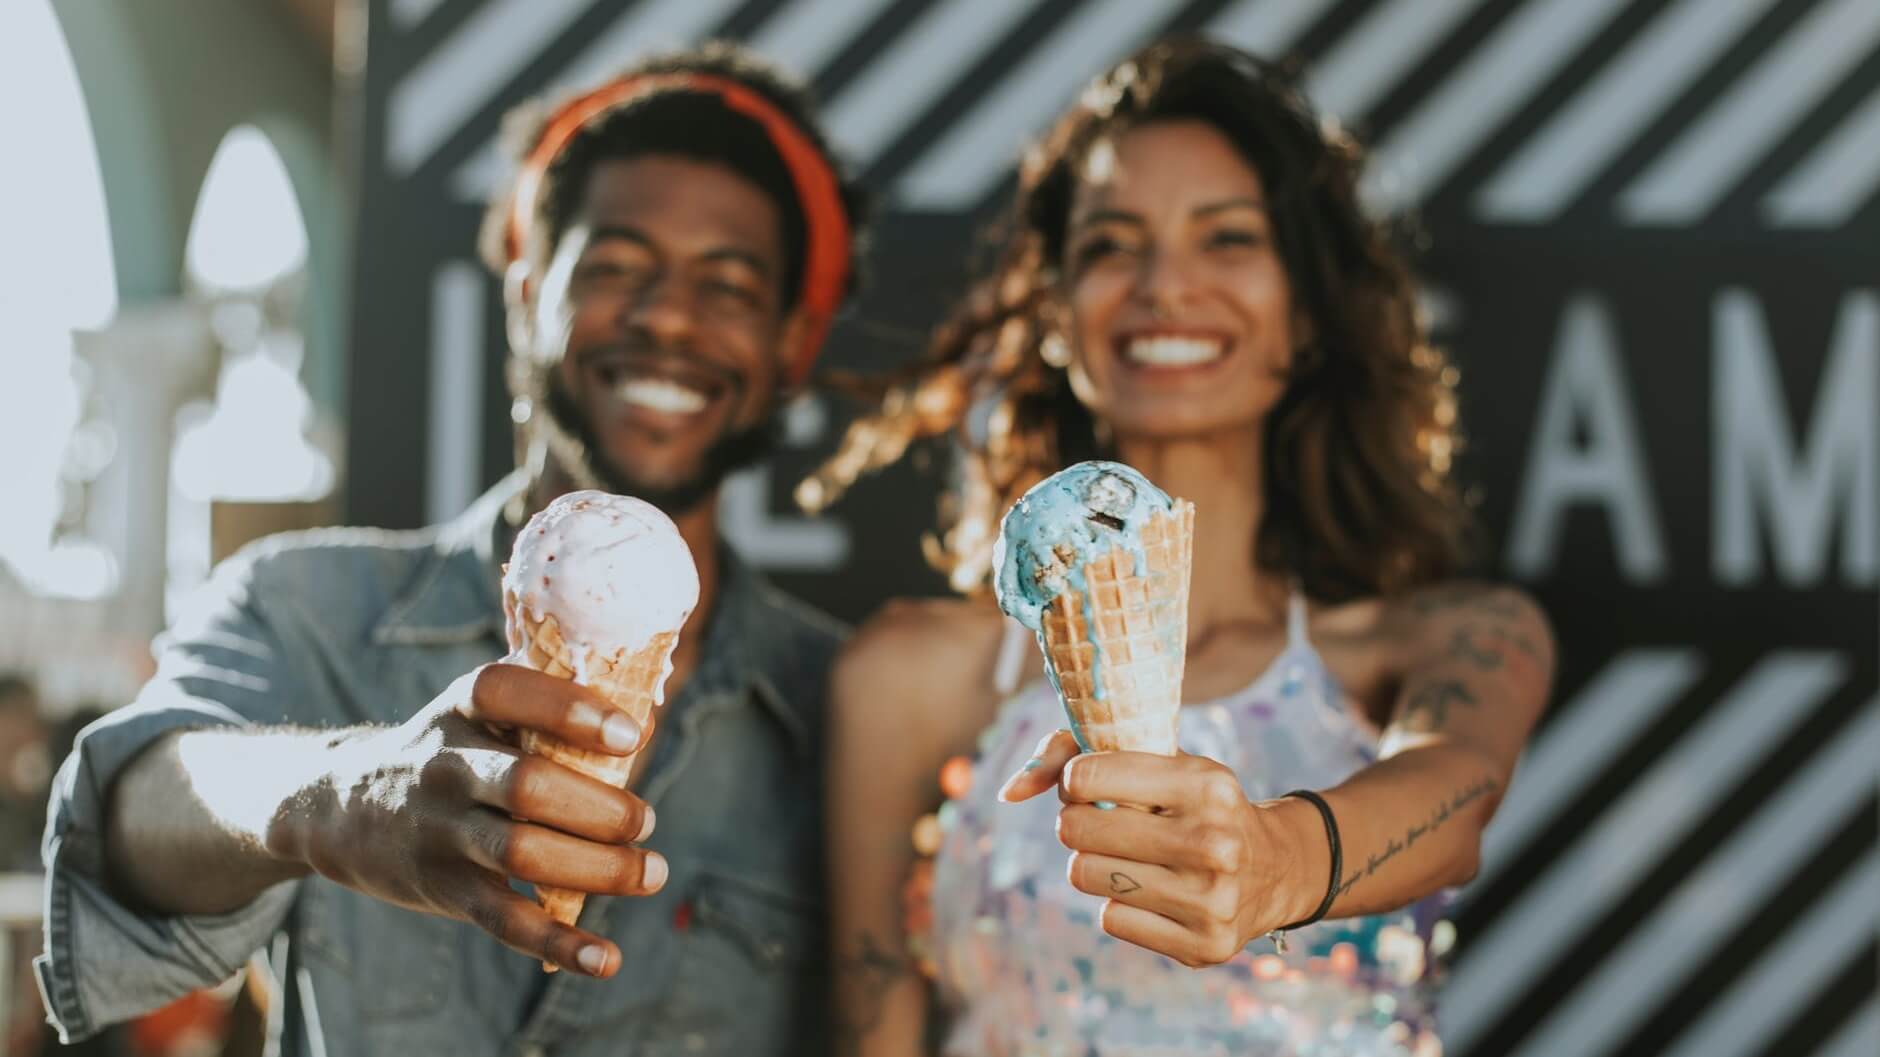 A Vegan and 100% Plastic-Free Ice Cream Shop Arrives in Miami